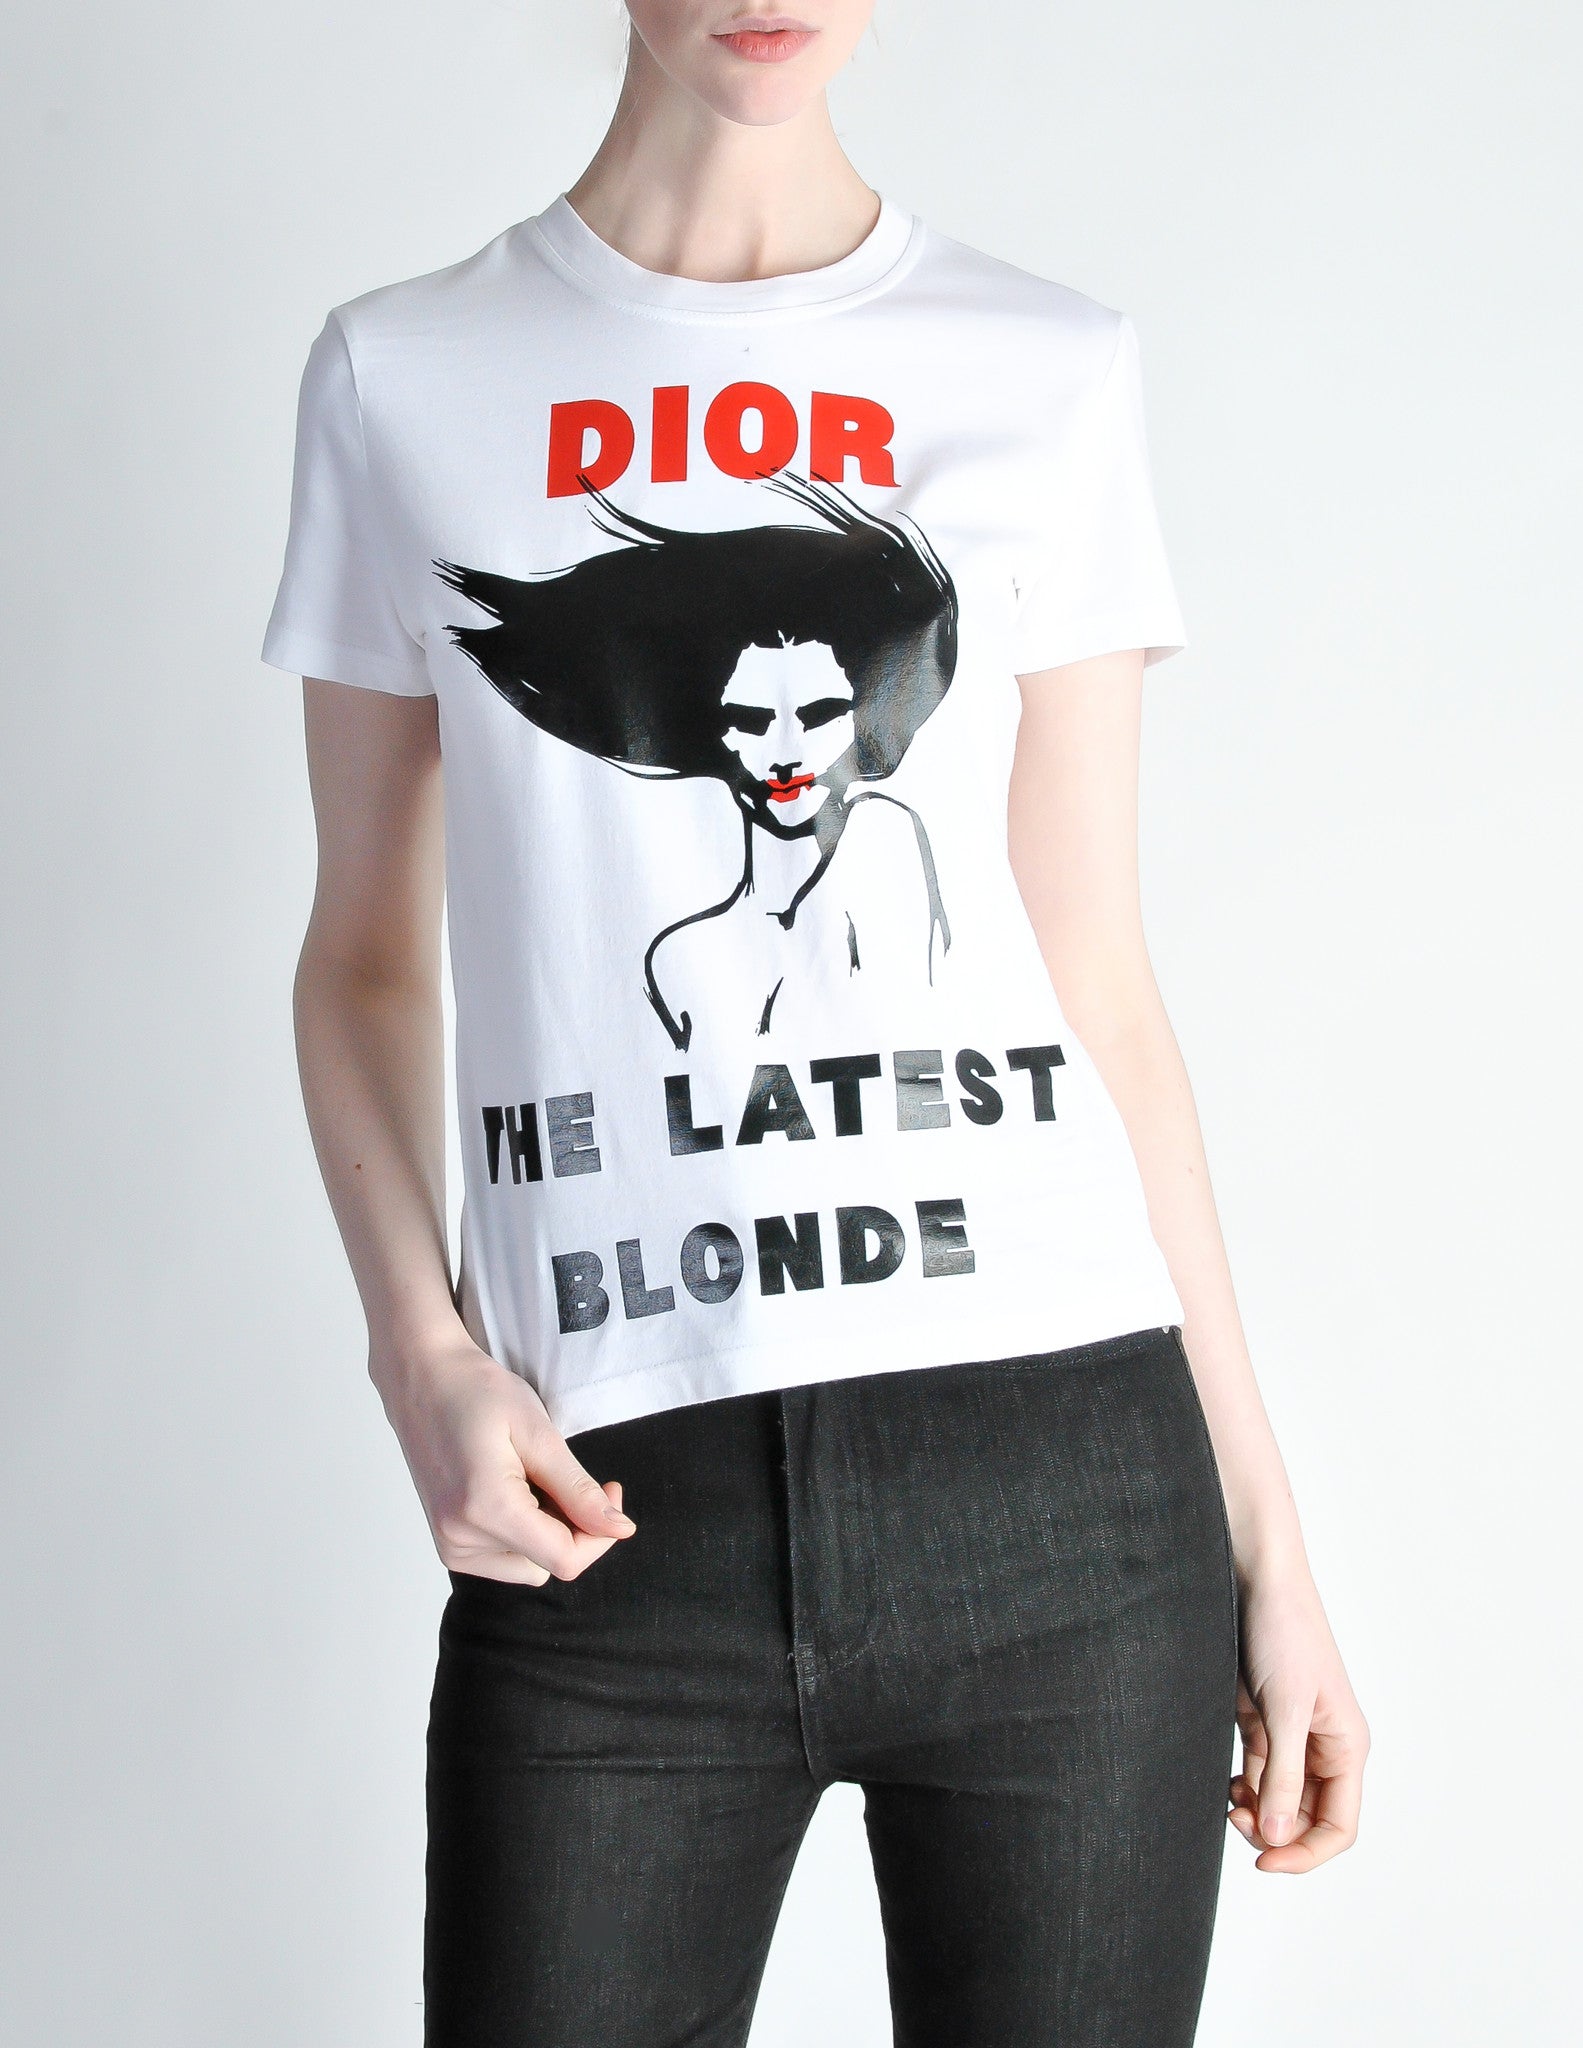 Christian Dior T Shirt - Christian Dior Vintage 'Dior The Latest Blonde' T-Shirt ... : A wide selection of items: